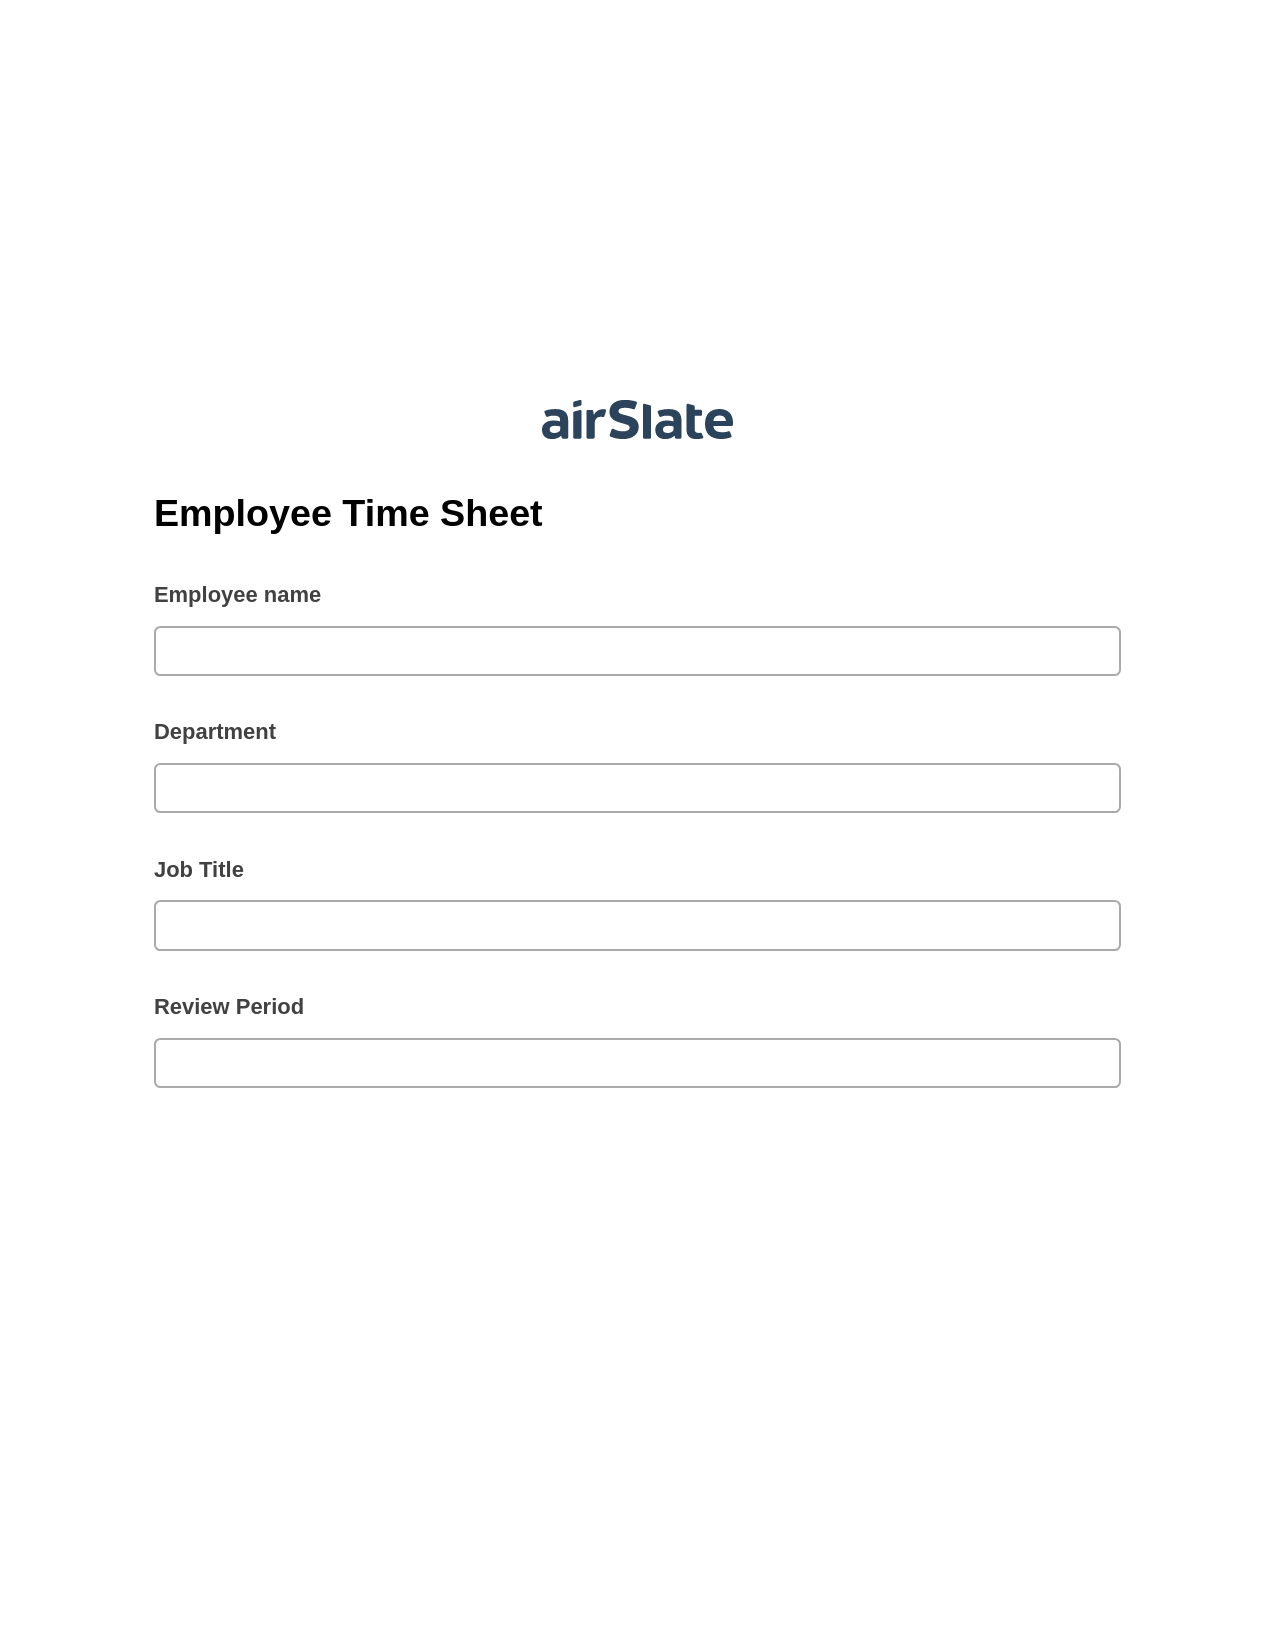 Employee Time Sheet Prefill from NetSuite records, Create Salesforce Records Bot, Archive to Box Bot